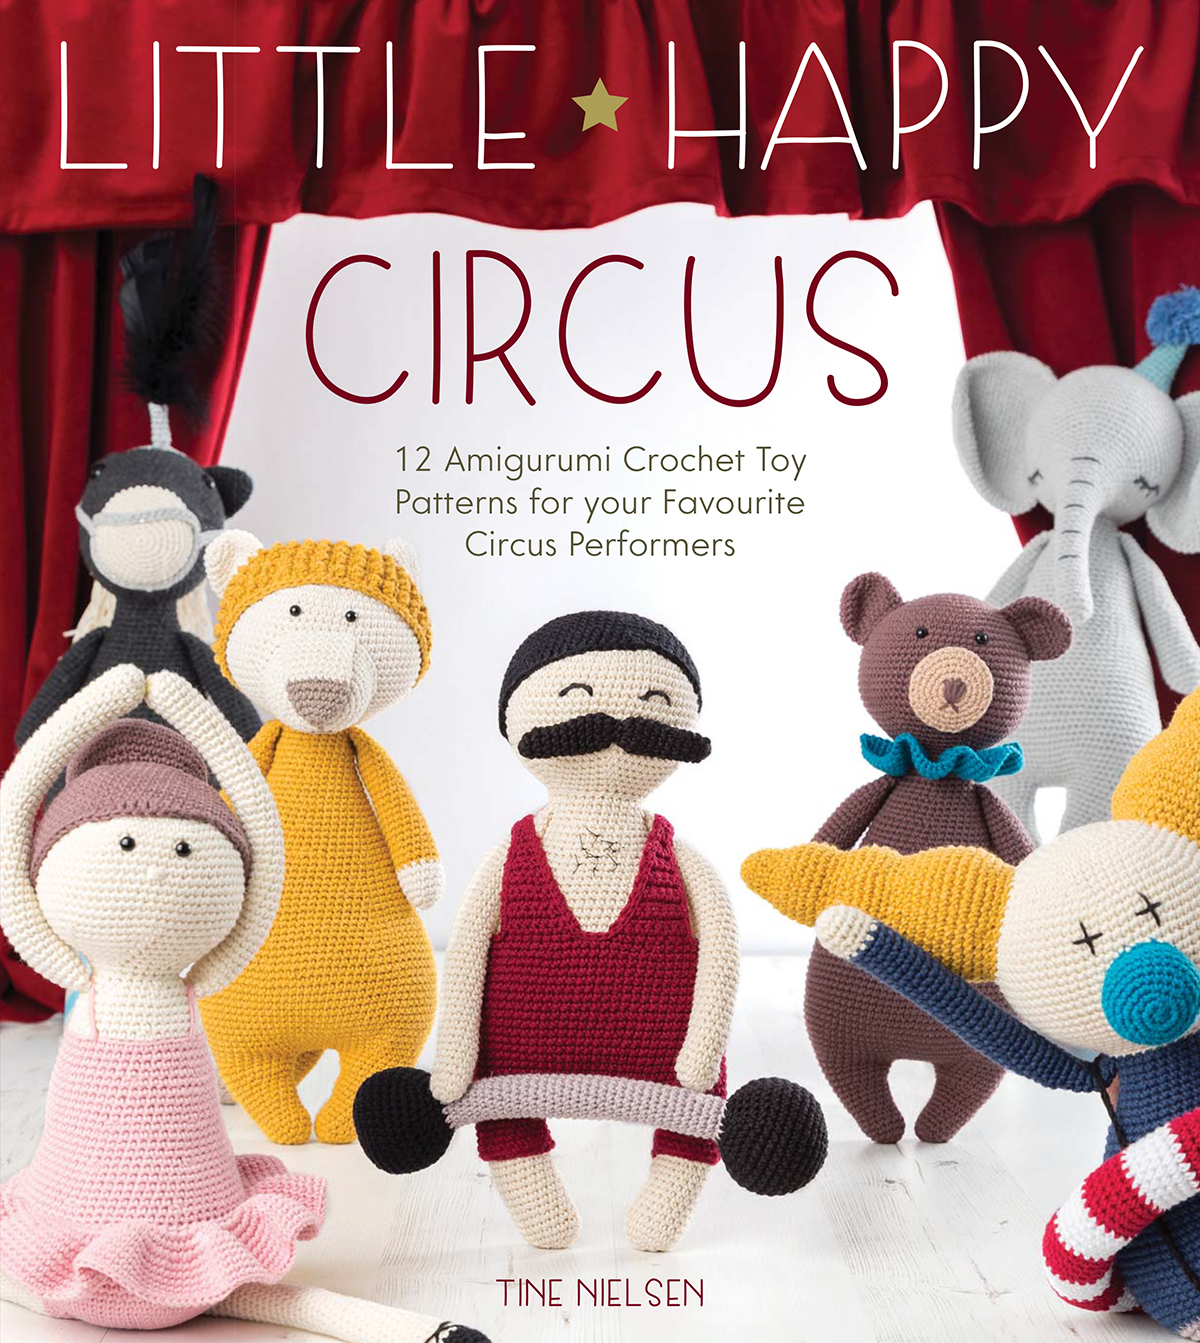 Little happy circus 12 amigurumi crochet toy patterns for your favourite circus performers - image 1